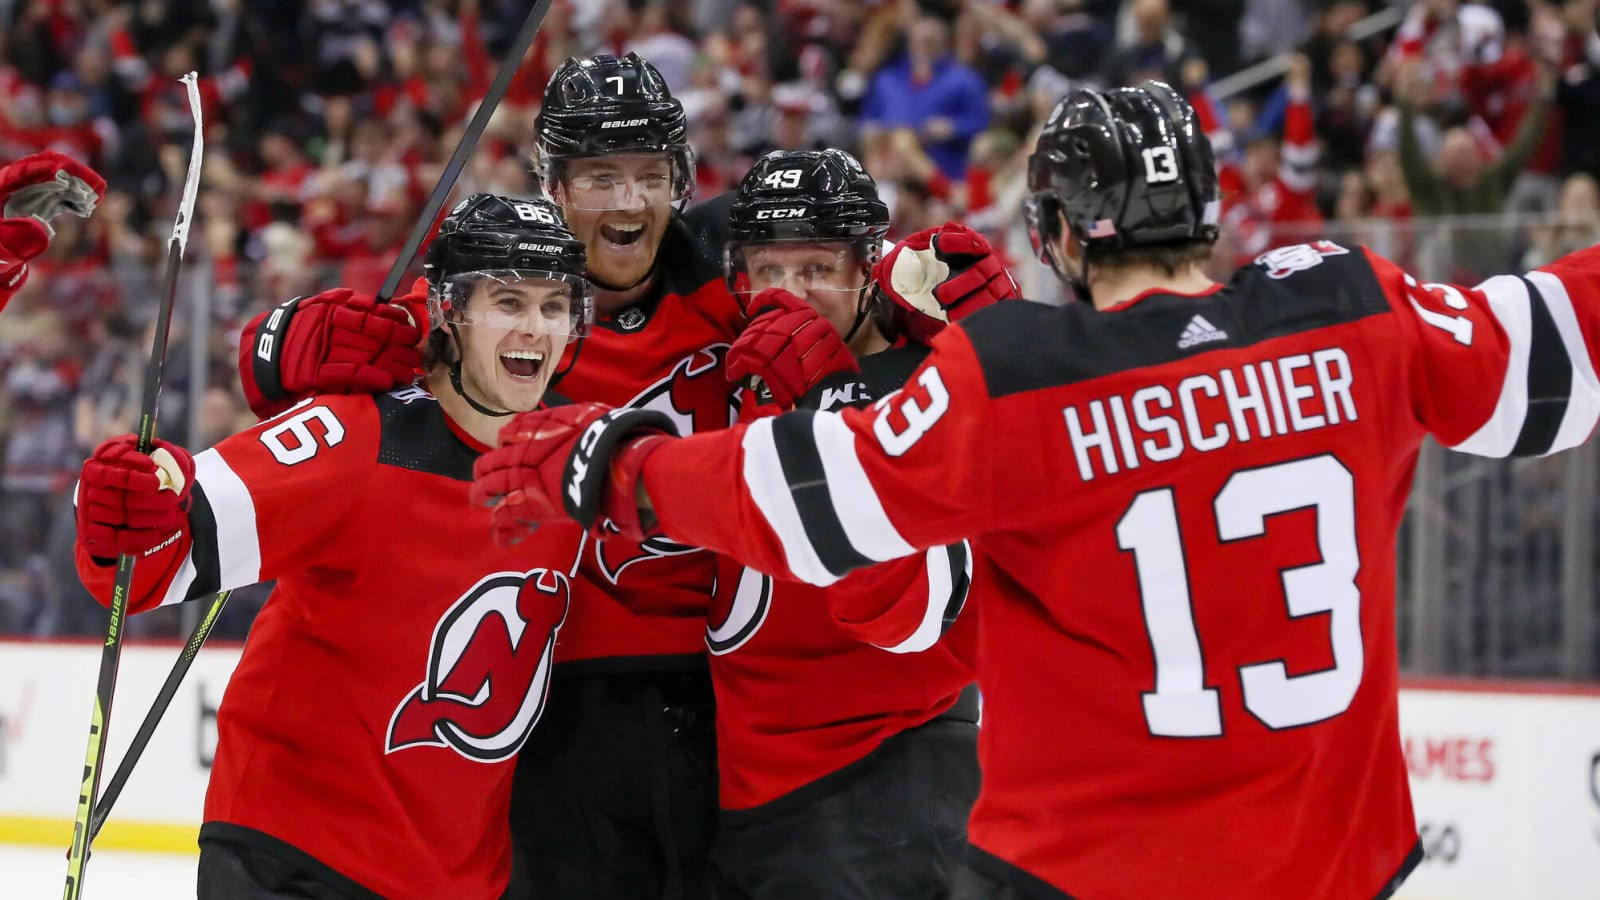 Nico Hischier Celebrating With Team On Ice Wallpaper